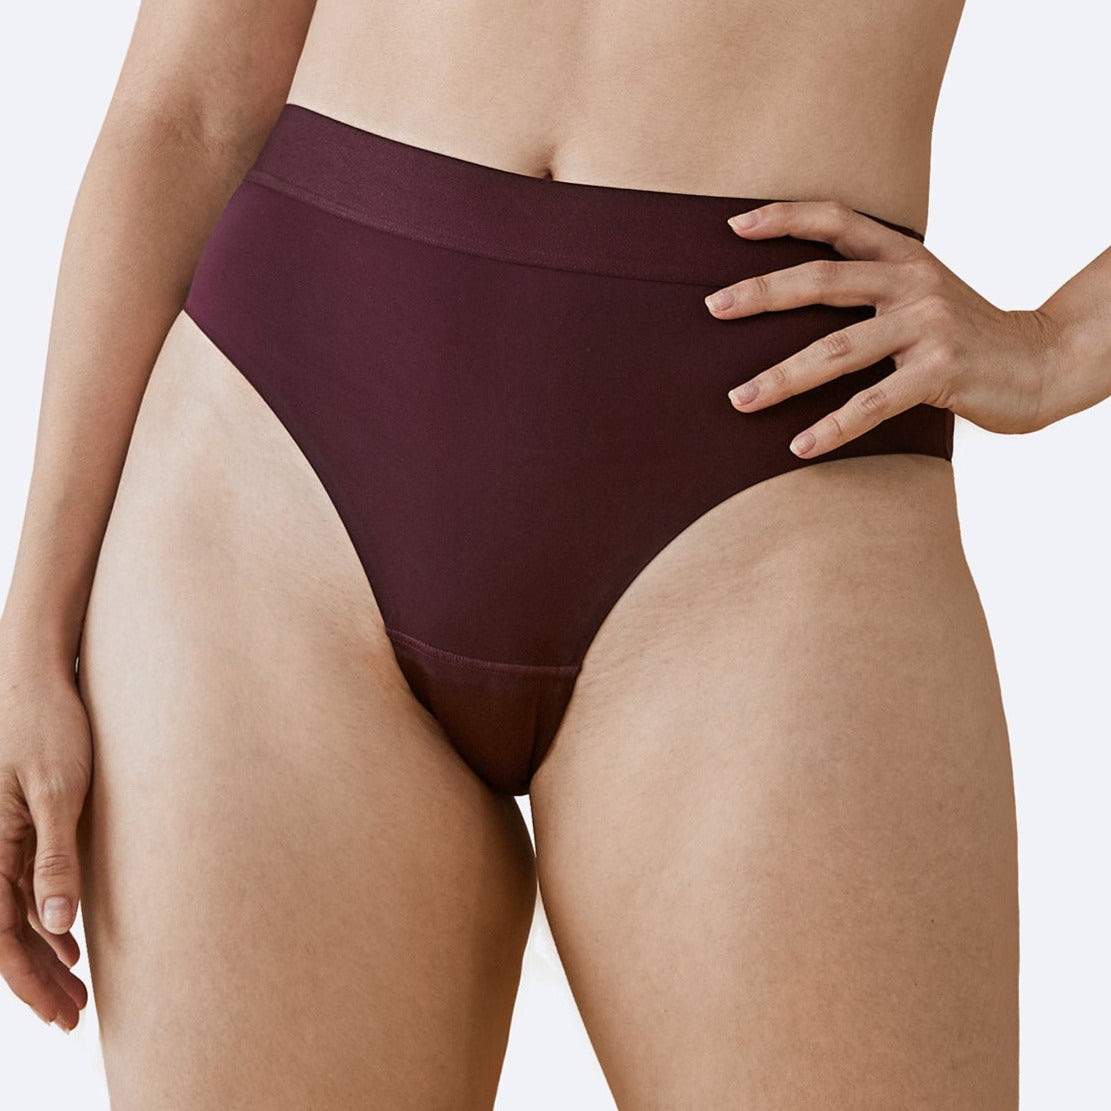 Thong Style Period Underwear, Secure & Discreet Protection